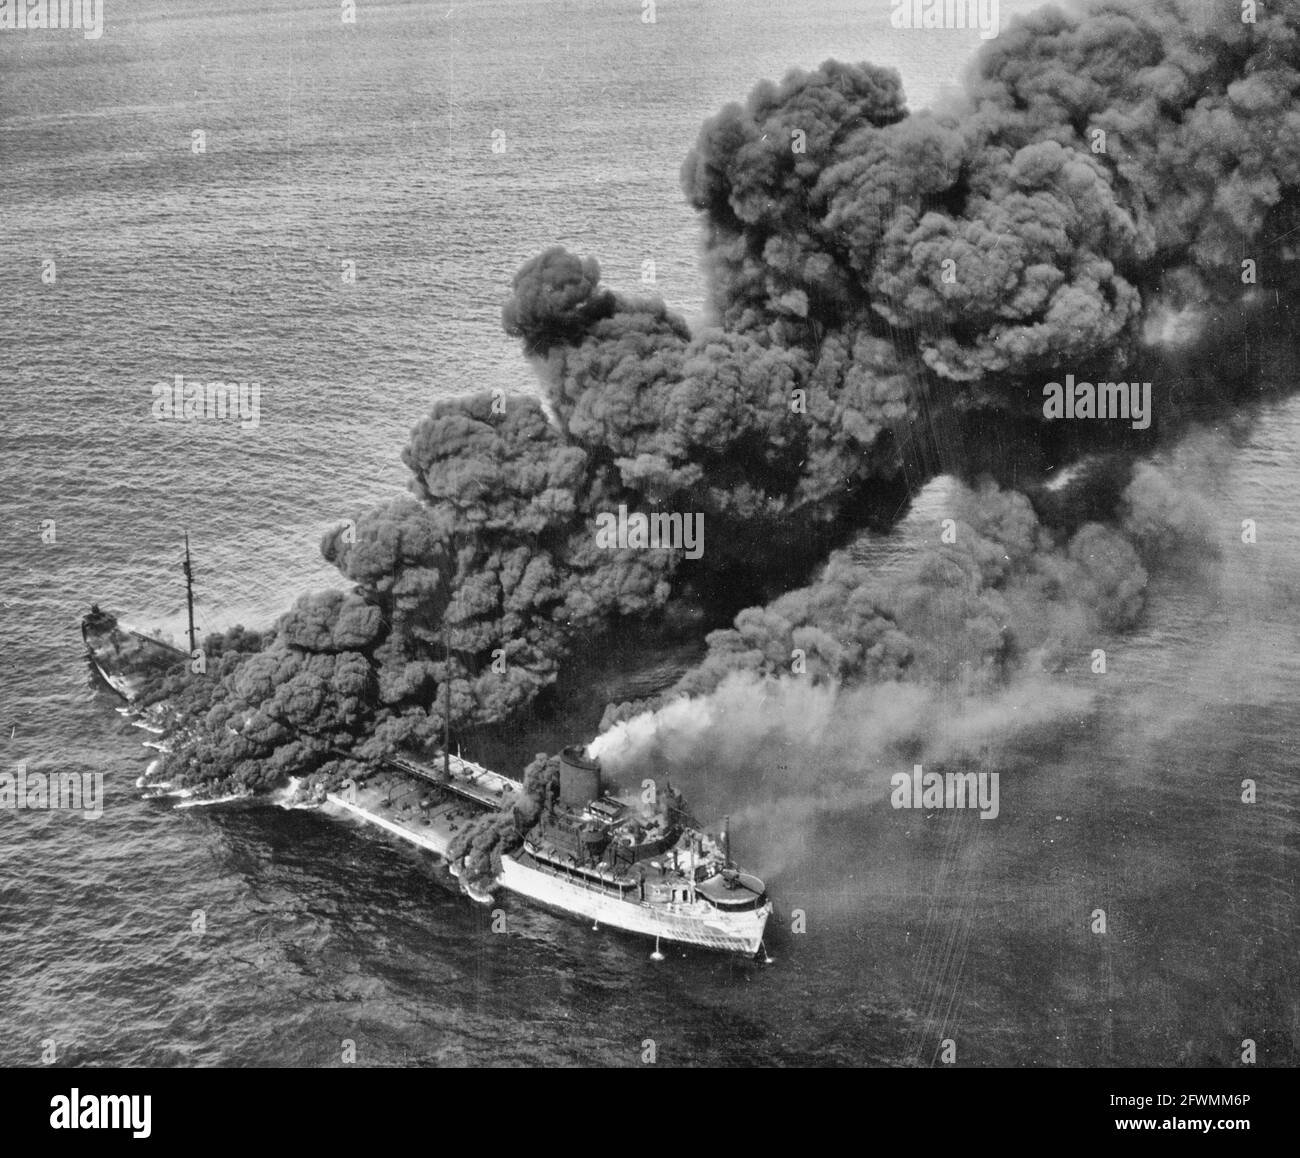 A United States tanker torpedoed by an Axis submarine. Despite a raging fire which sent columns of black, oily smoke billowing into the sky, crew members were able to bring the flames under control and the tanker was towed to port by a United States Naval ship. The tanker is now in an east coast ship yard being repaired and soon will be back in active service aiding the nation against its enemies - World War II Stock Photo